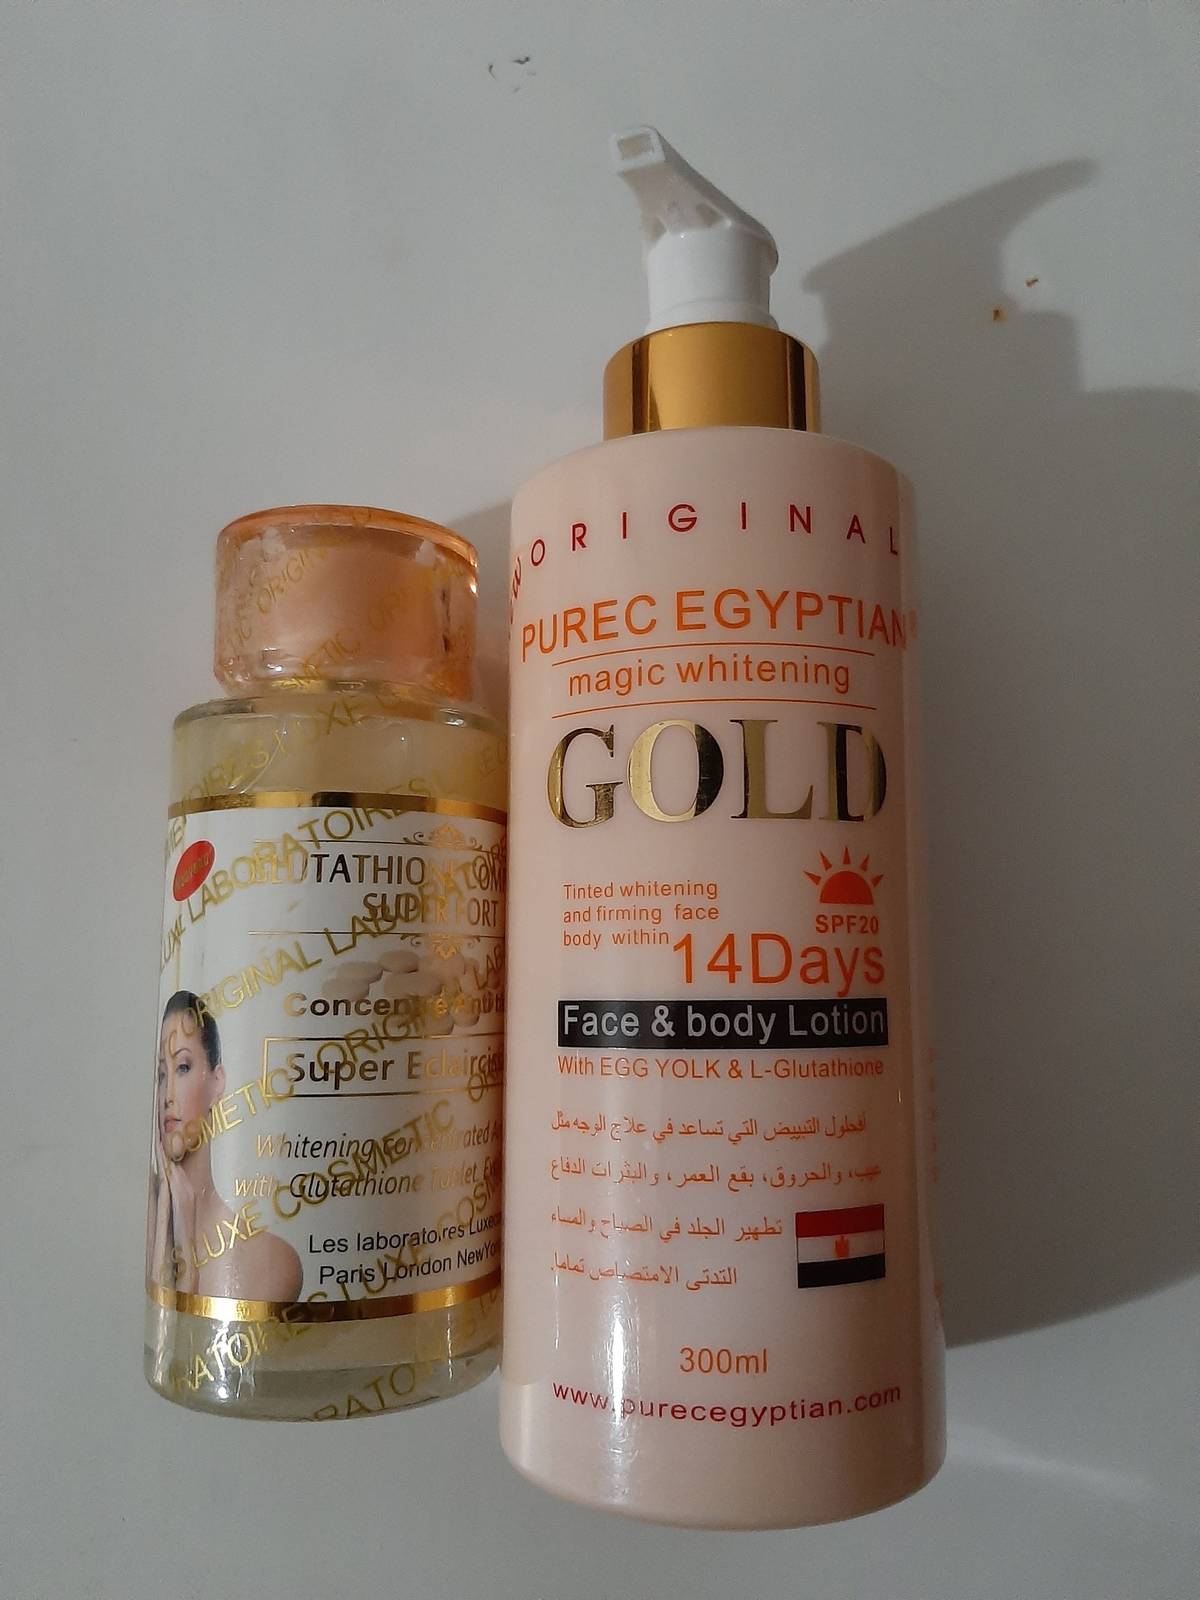 Pure Egyptian Gold whitening face body lotion+ Glutathione comprime serum